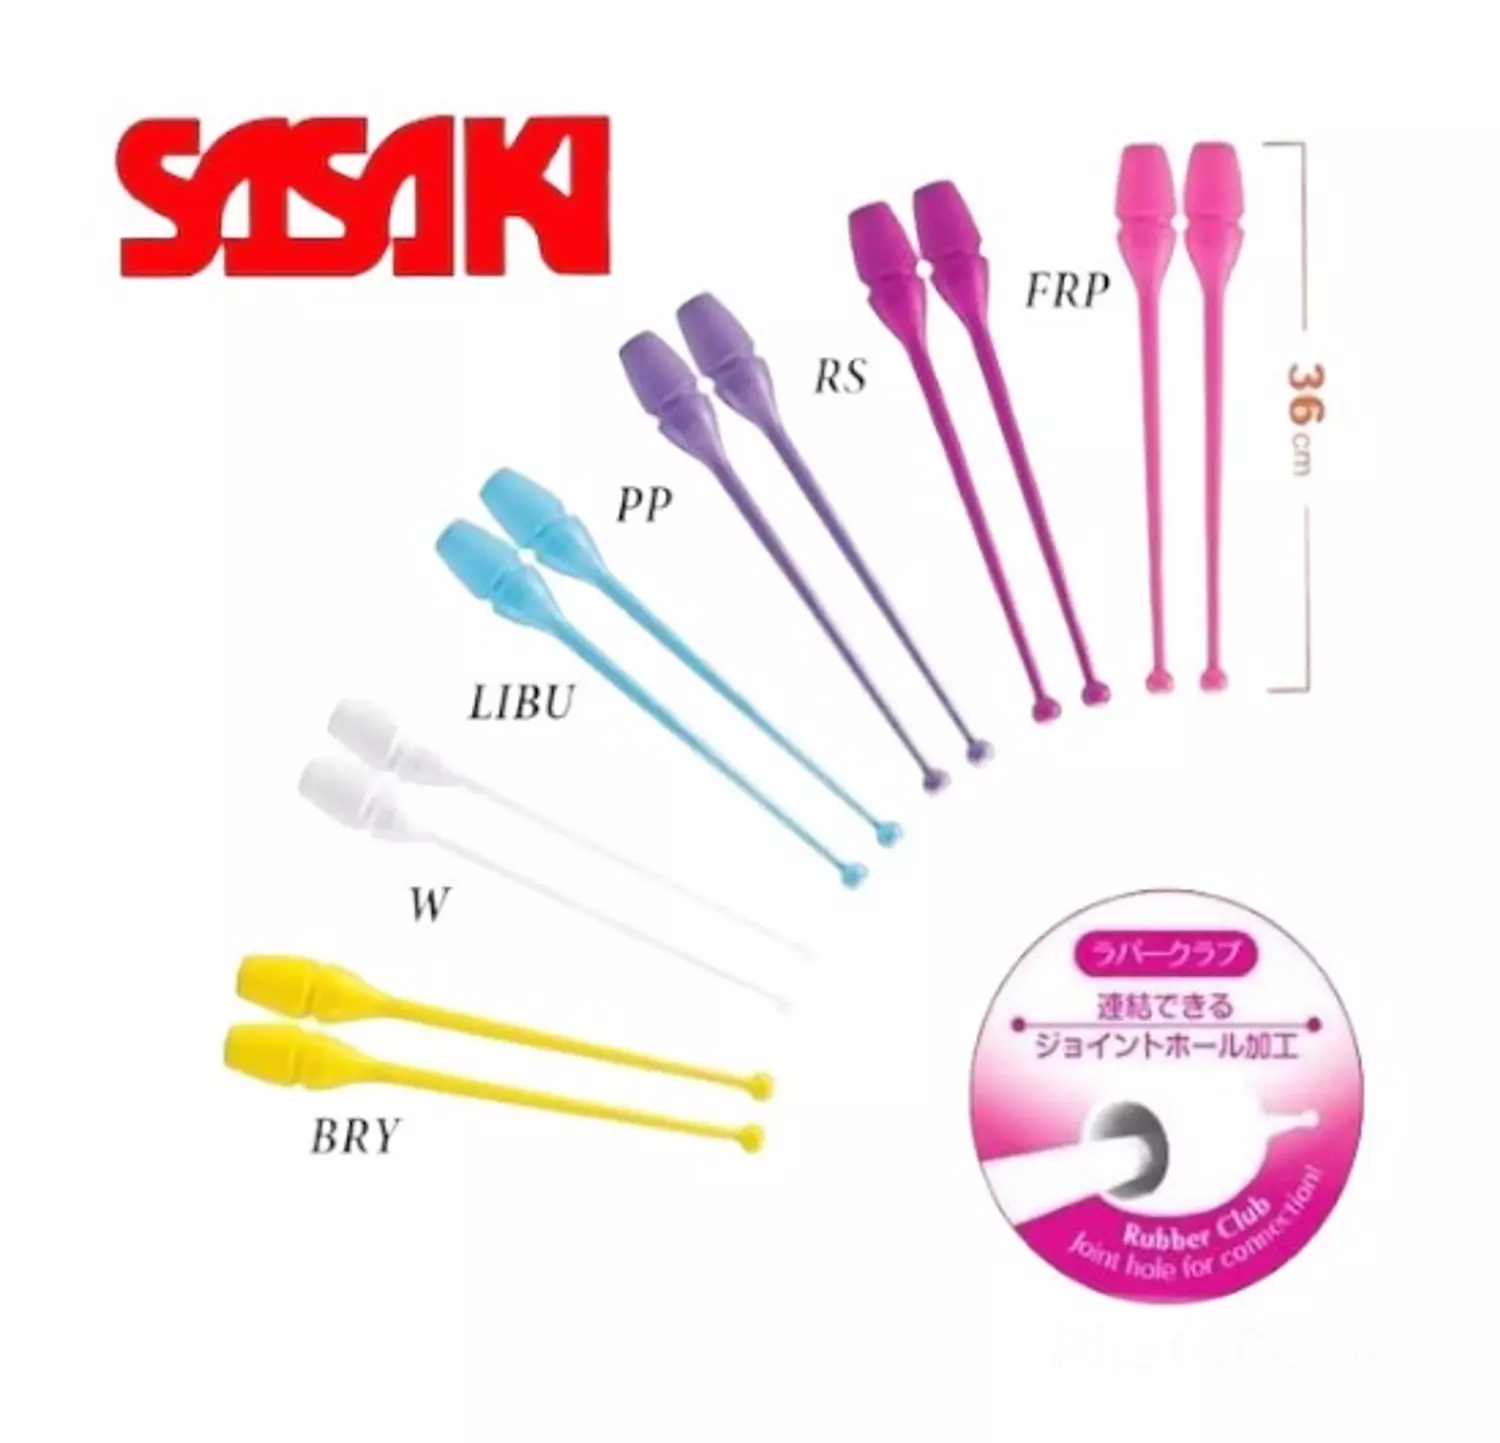 Sasaki - One-color Rubber Clubs | 36cm hover image